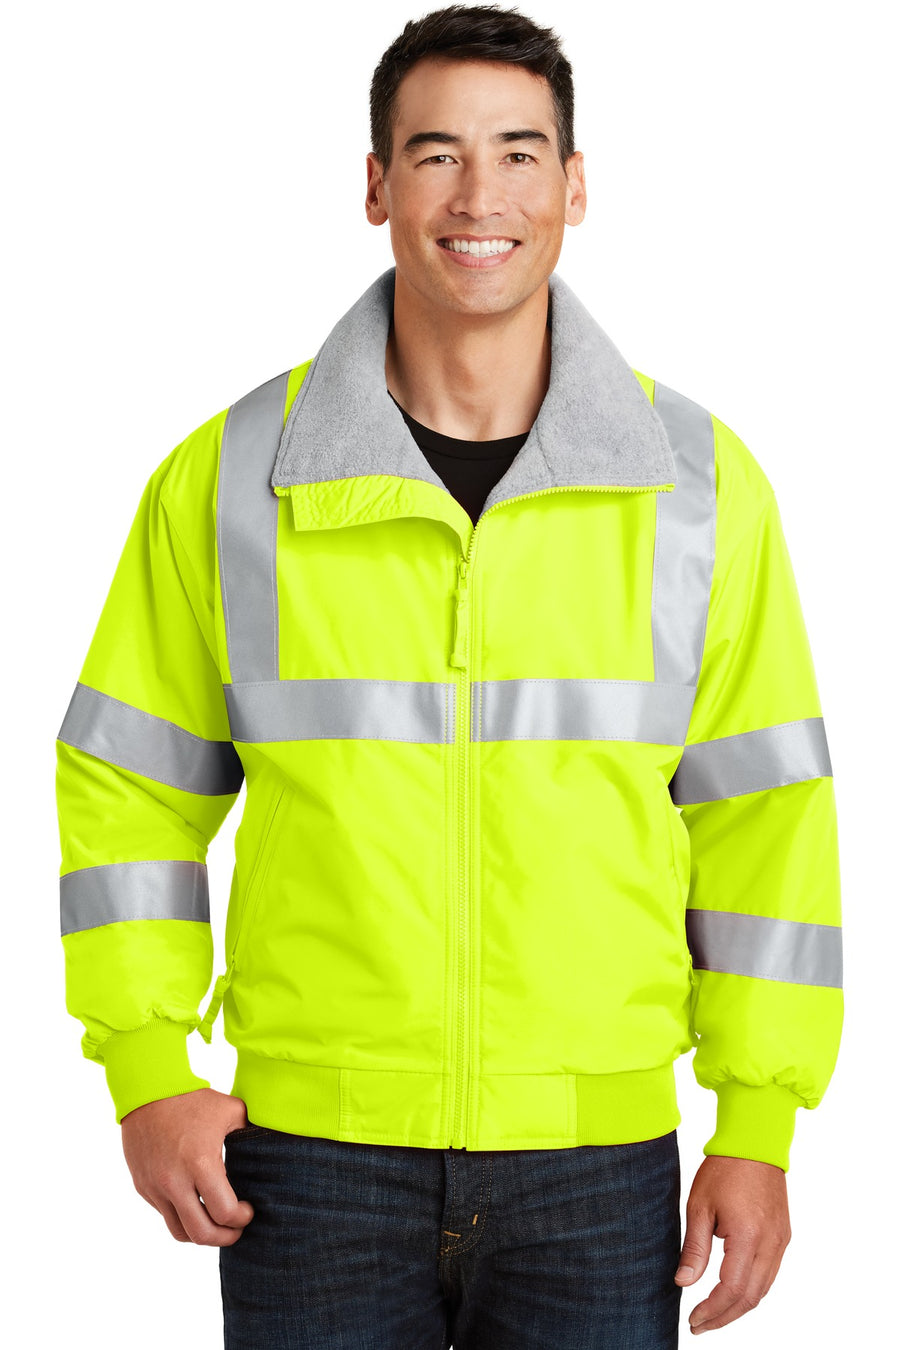 Port Authority Enhanced Visibility Challenger Jacket with Reflective Taping.